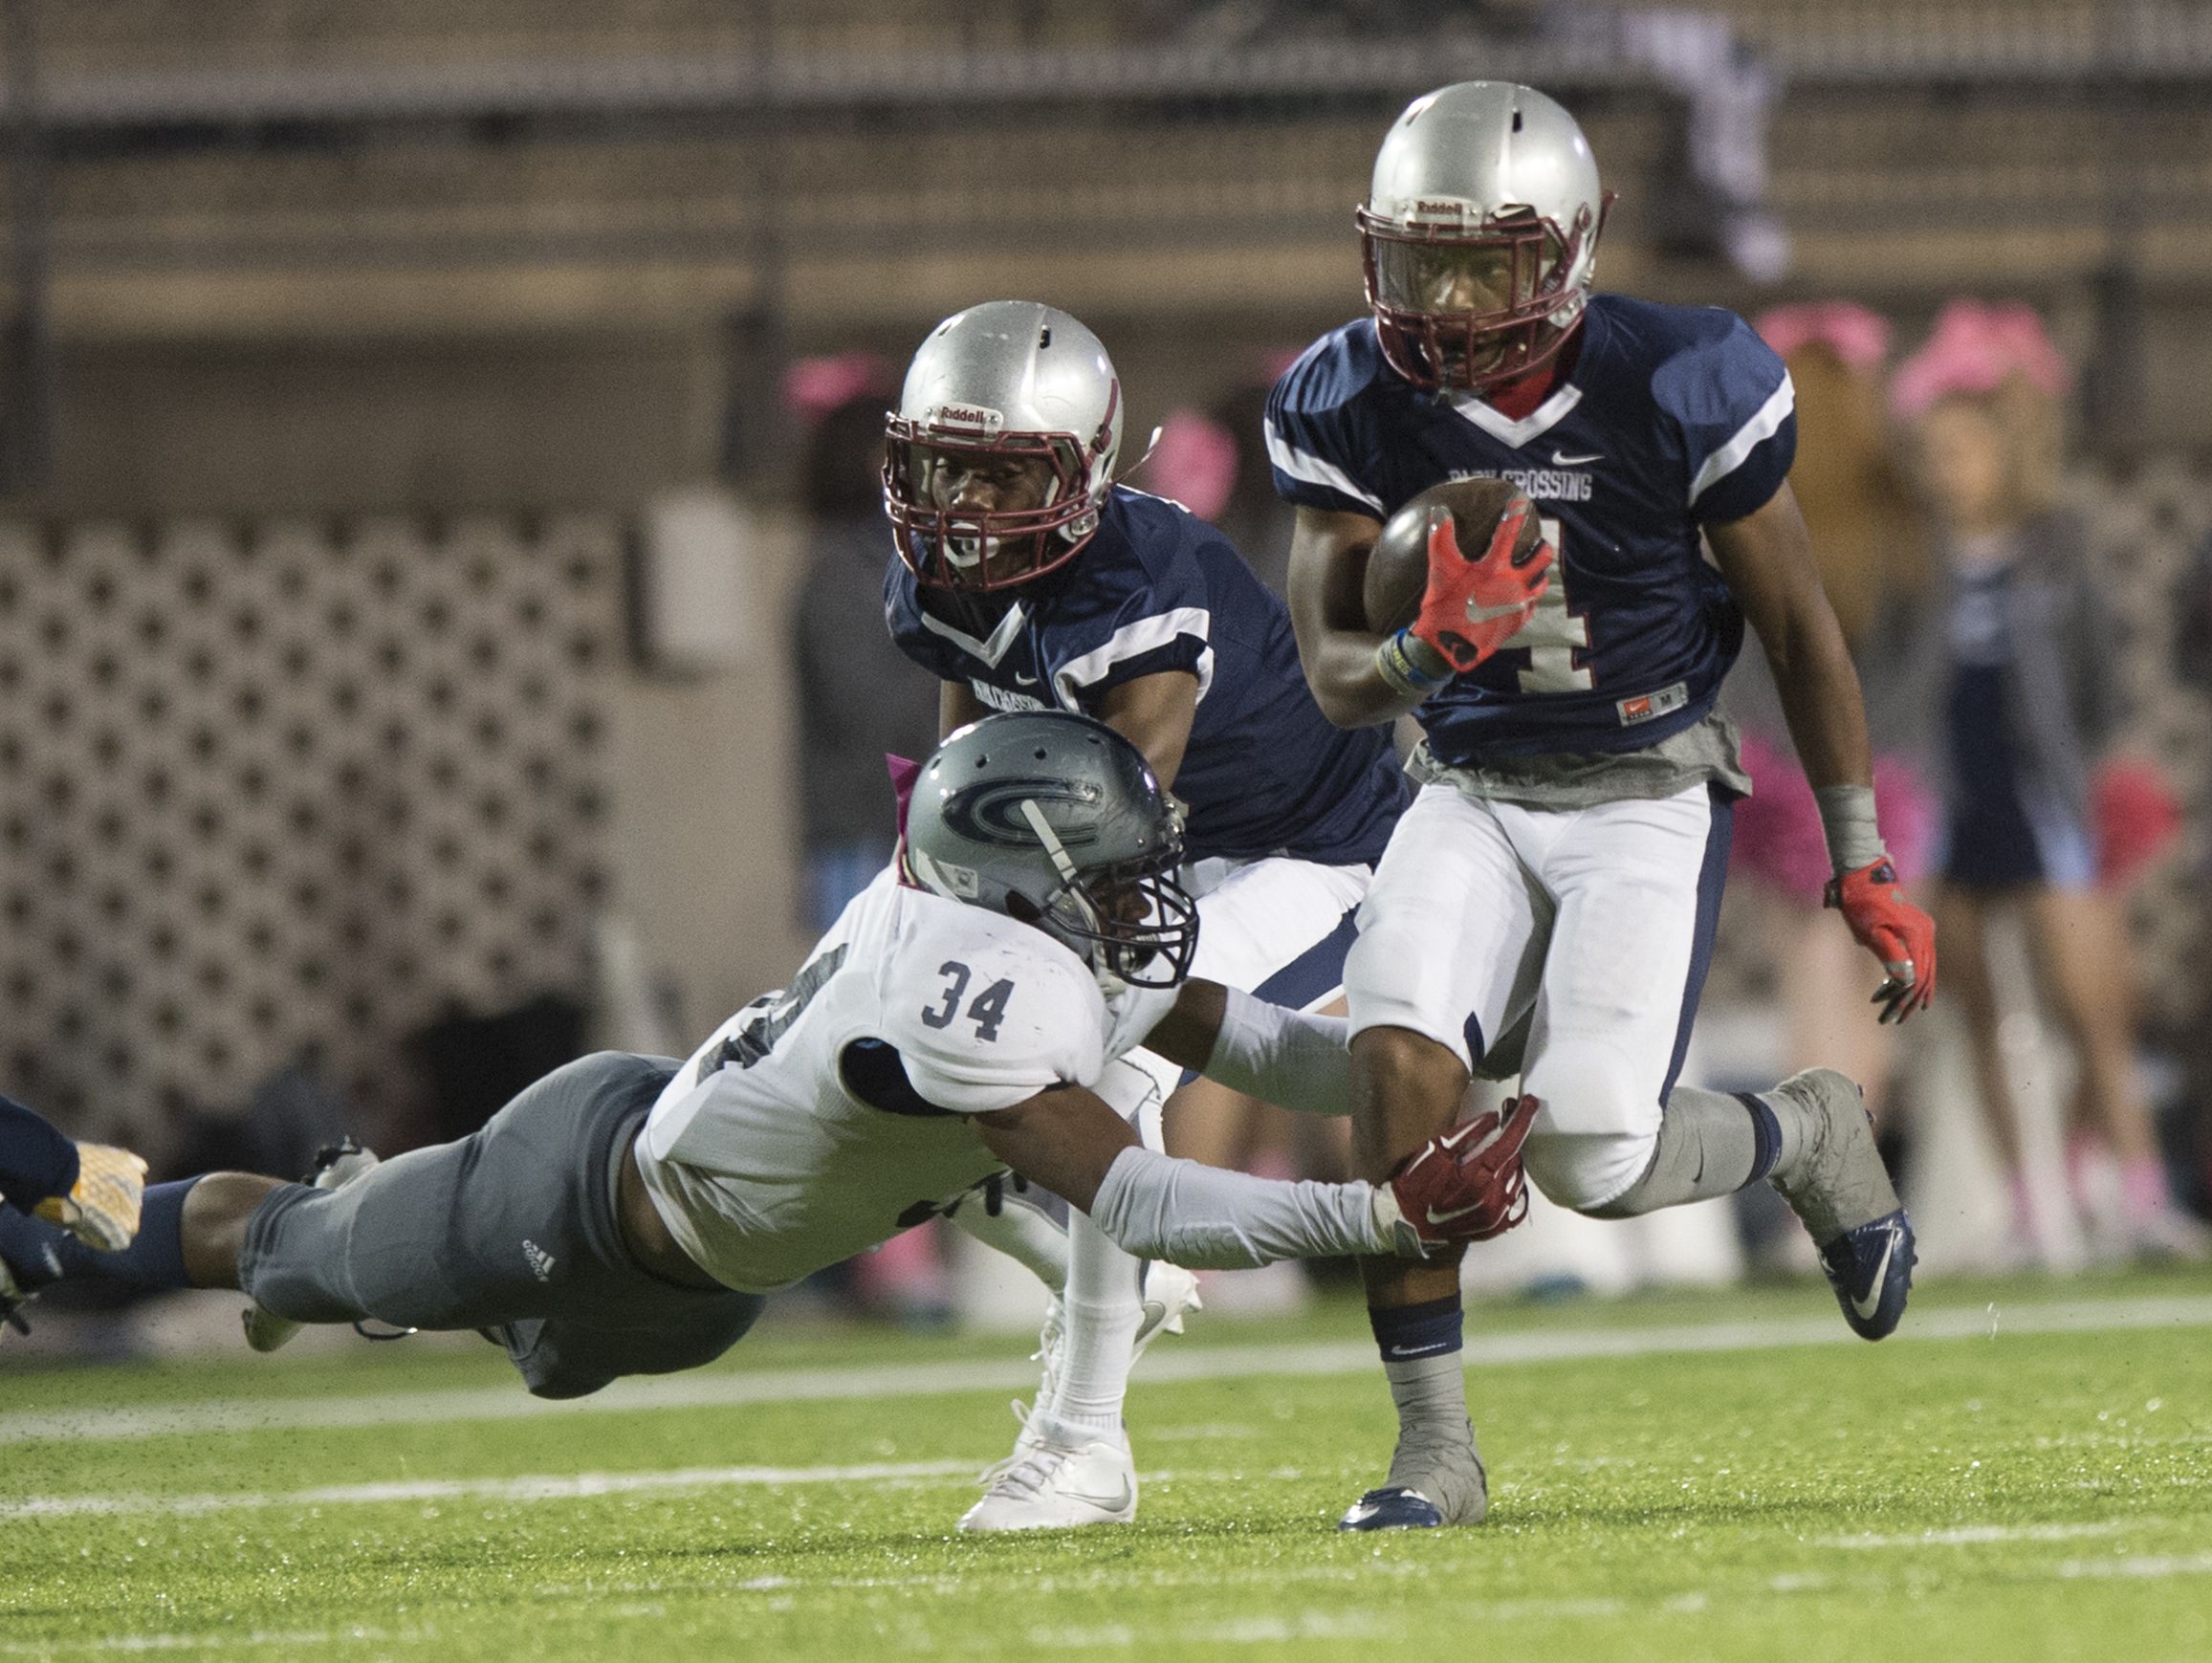 Park Crossing's Nicholas Jones (4) runs downfield as Clay-Chalkville's Derrick Beam attempts to tackle him during the football game on Friday, Oct. 21, 2016, at Cramton Bowl in Montgomery, Ala.